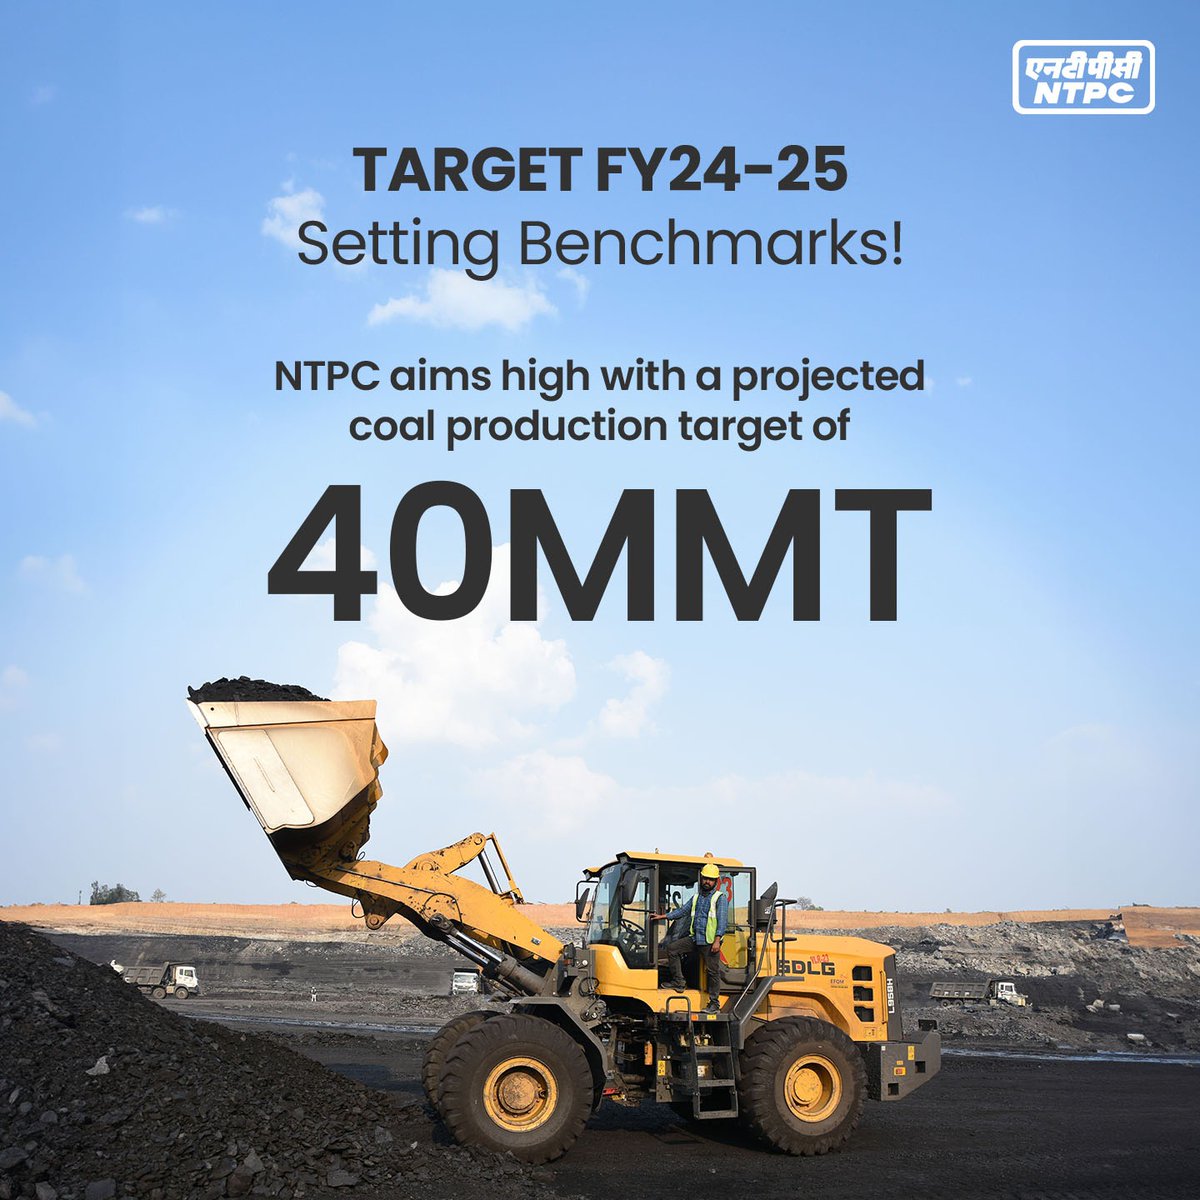 In FY25, NTPC aims to produce 40 MMT coal from its captive mines, with a target of 17% growth as compared to FY24. #CoalProduction #EnergySecurity #EnergyForAll #PoweringProgressResponsibly #NTPC @MinOfPower @CoalMinistry @OfficeOfRKSingh @PIB_India @PIB_Coal @CMDNTPC